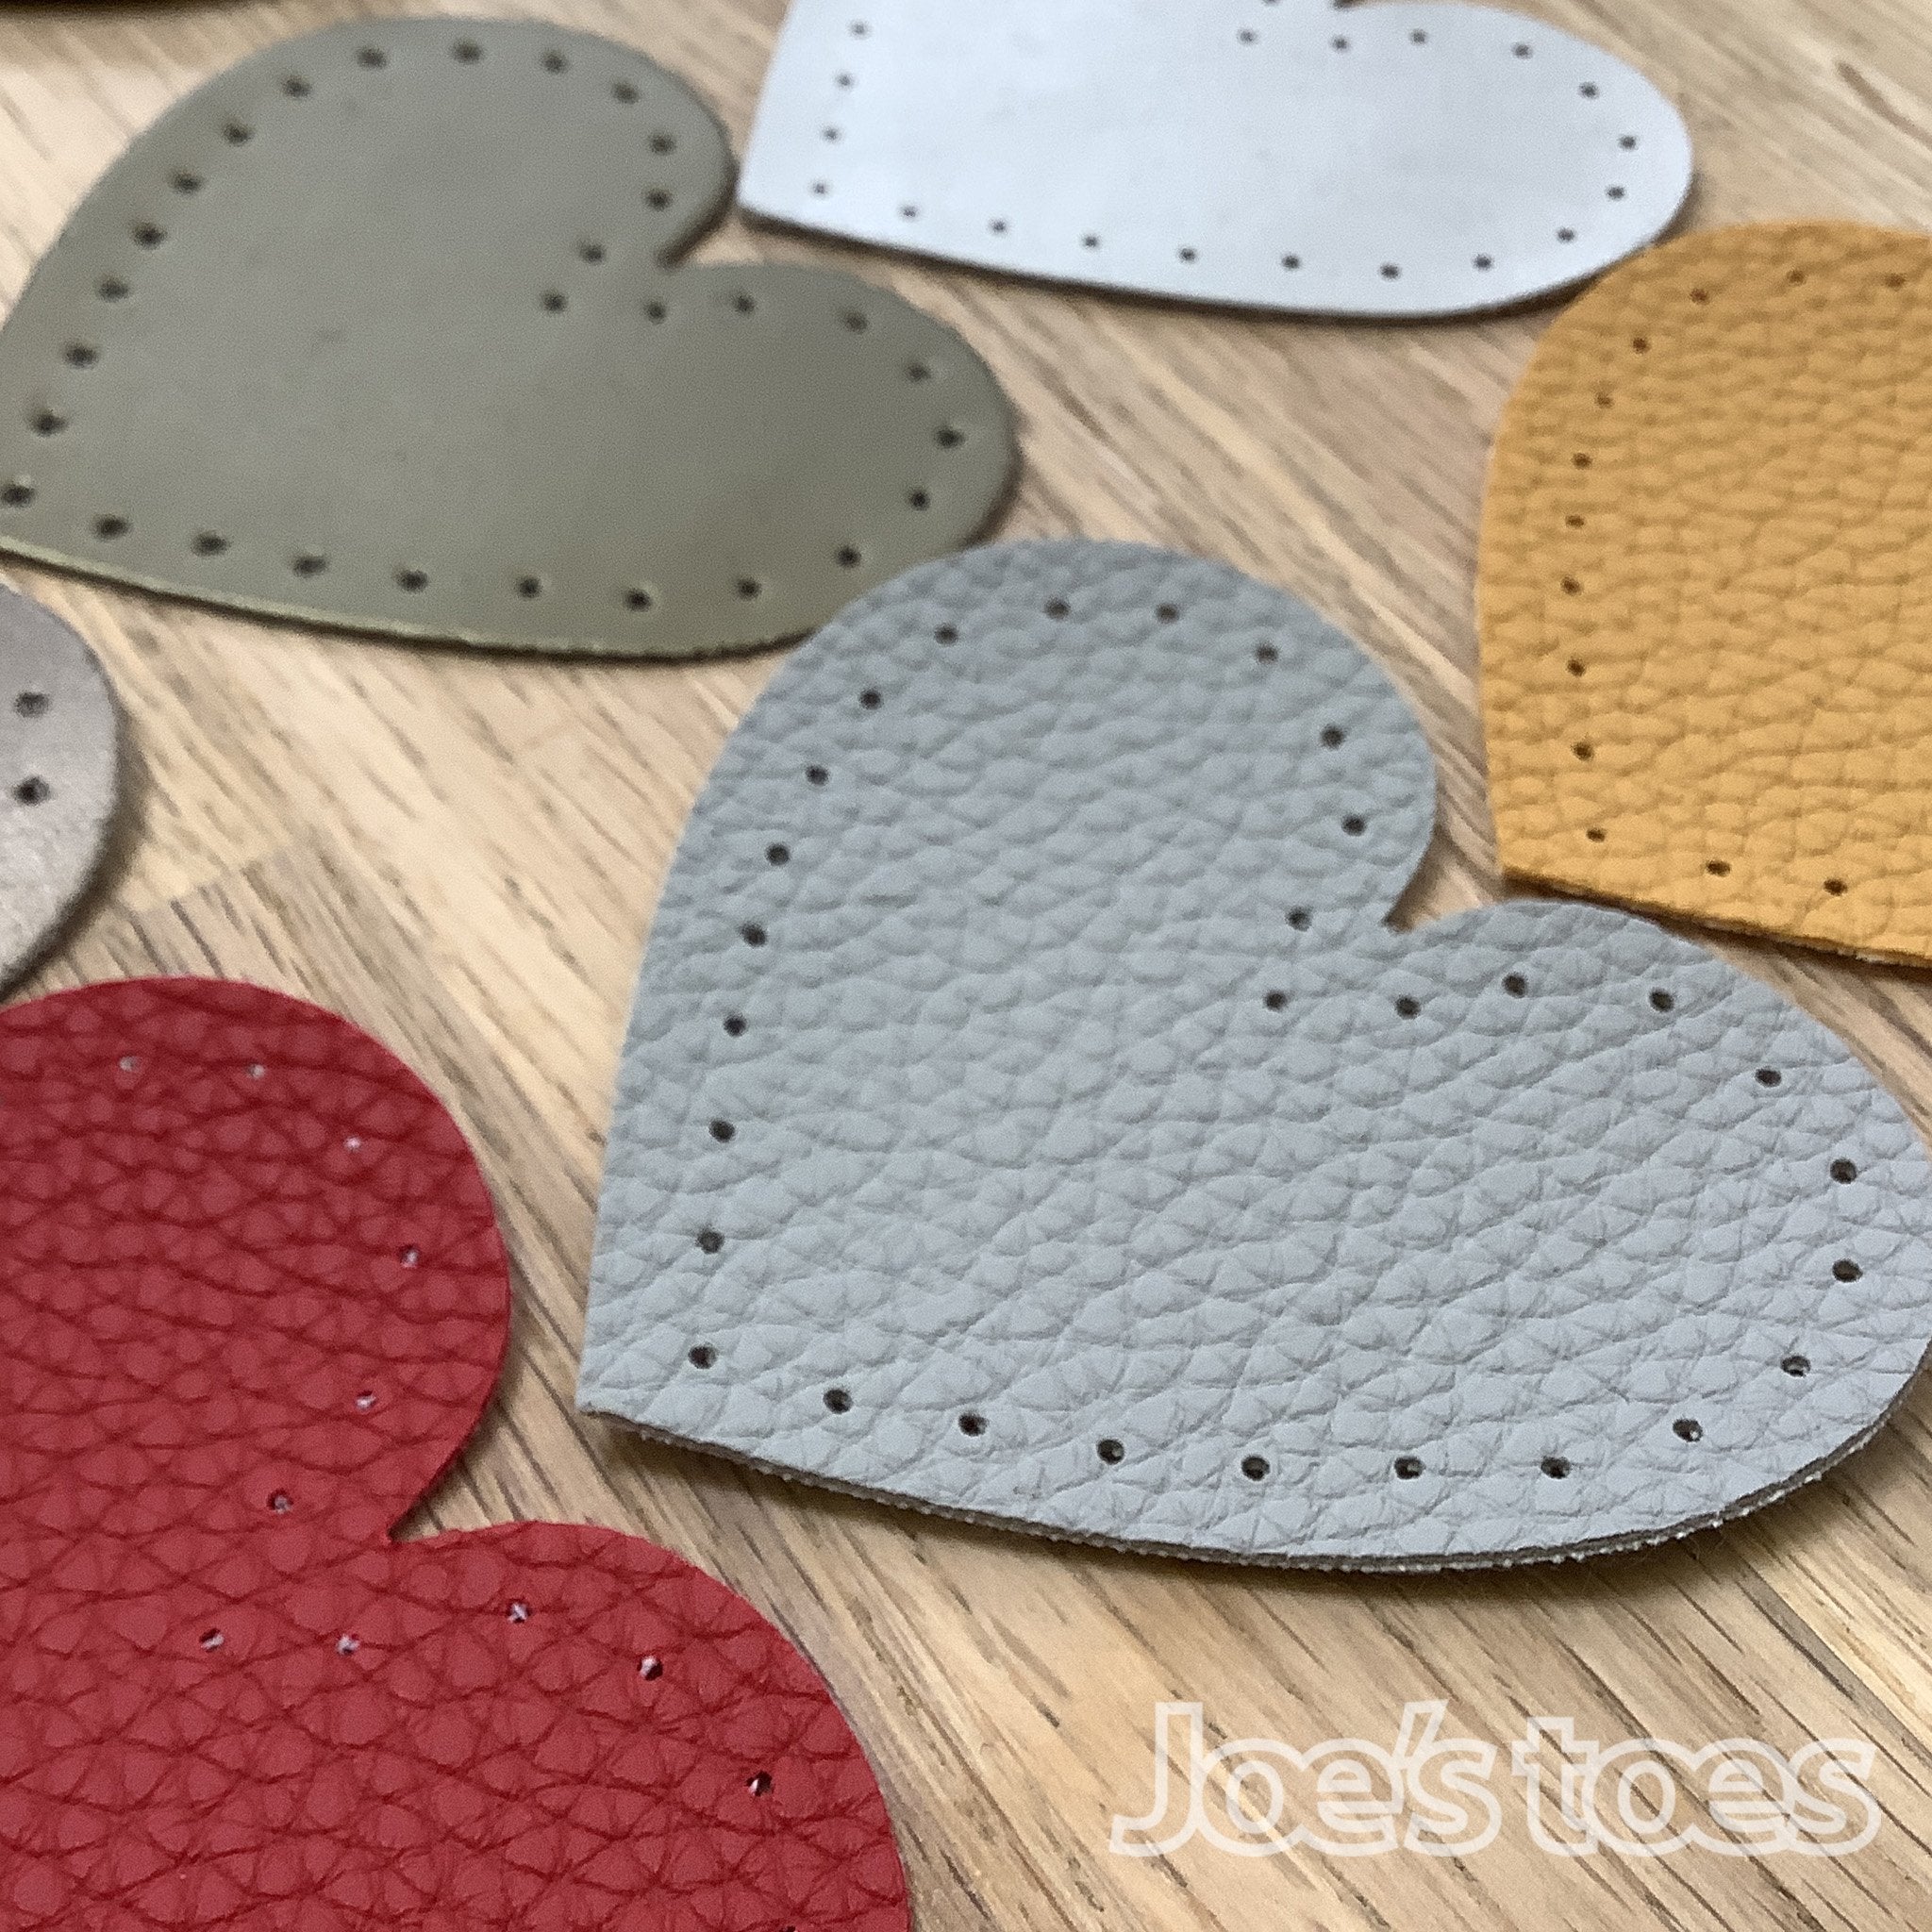 Sew On Patches  Oval Shaped – Joe's Toes US